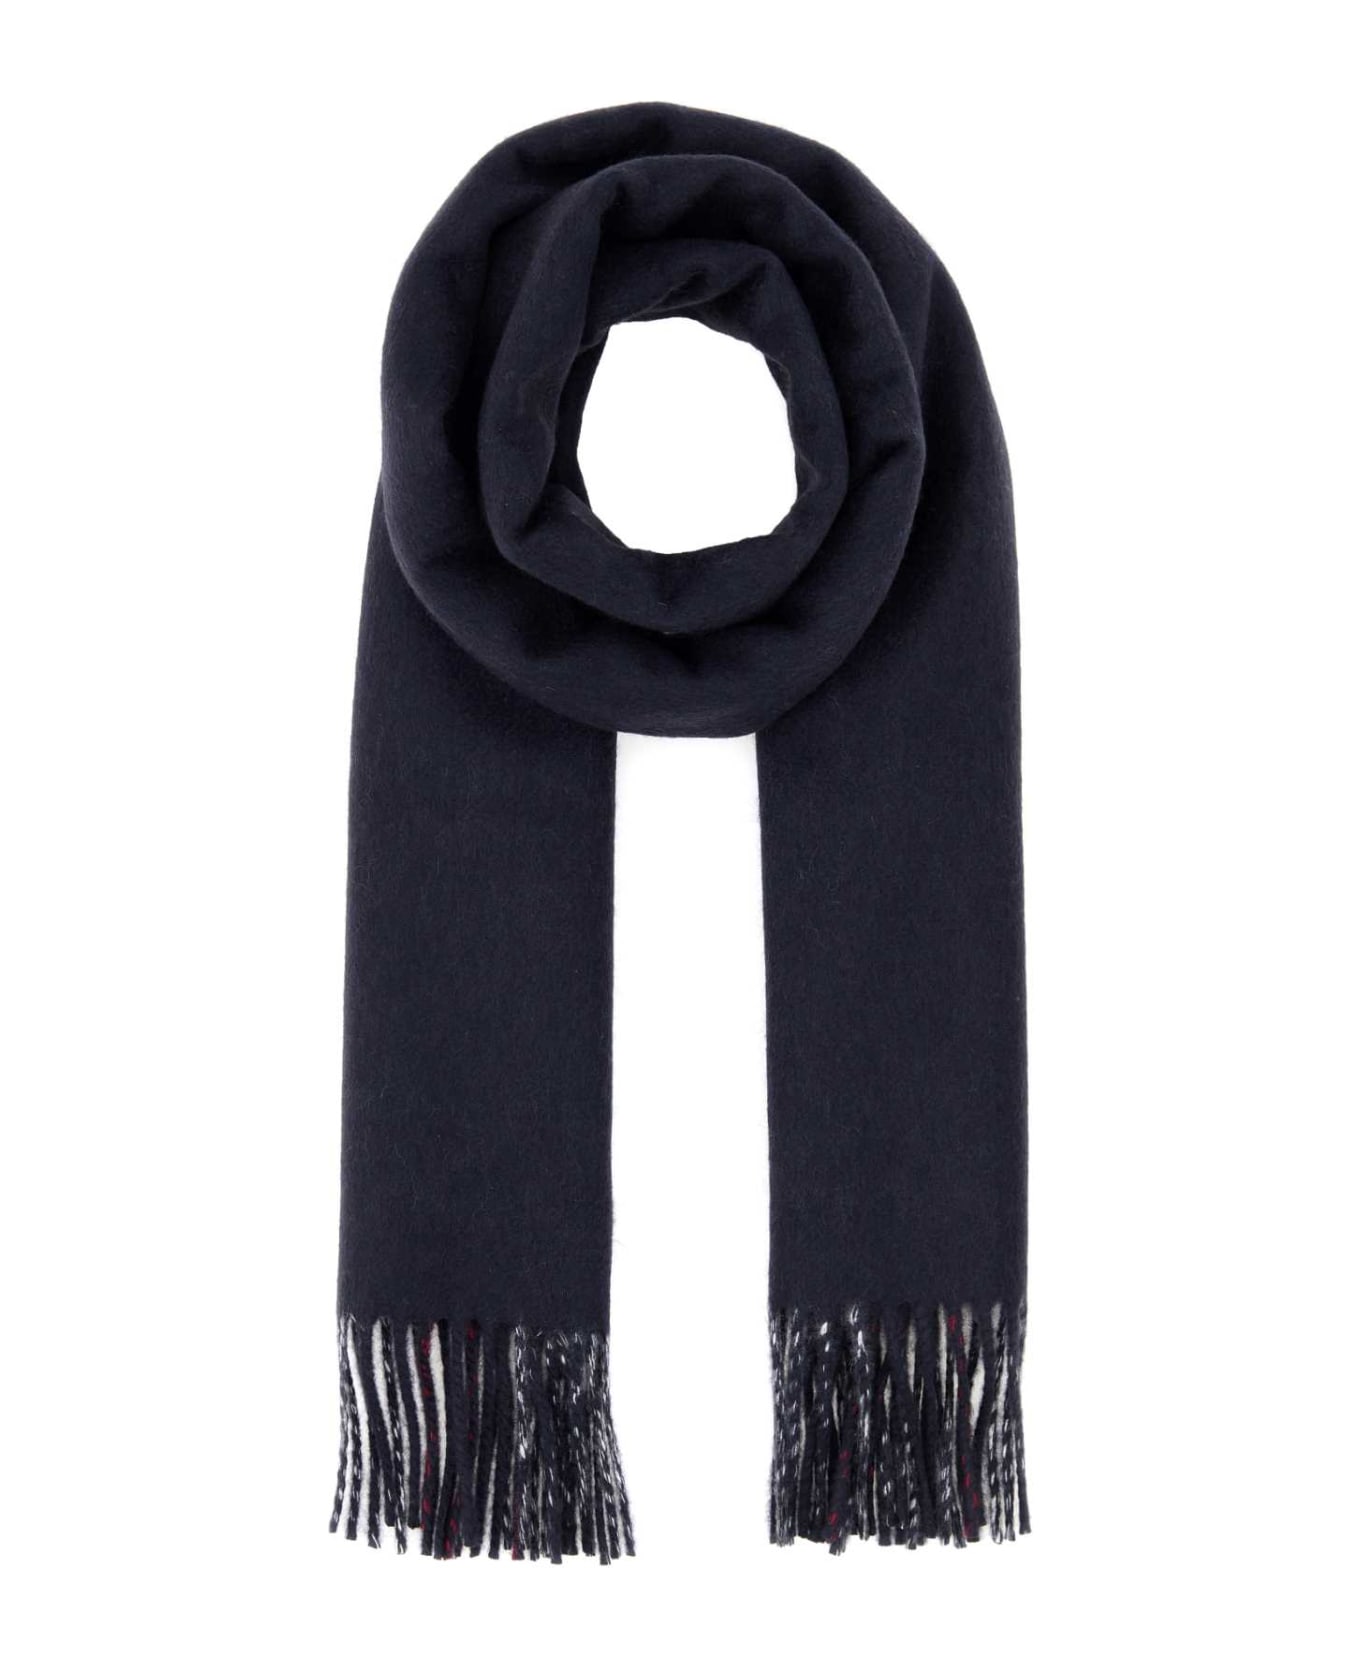 Burberry Navy Blue Cashmere Reversible Scarf - NAVY